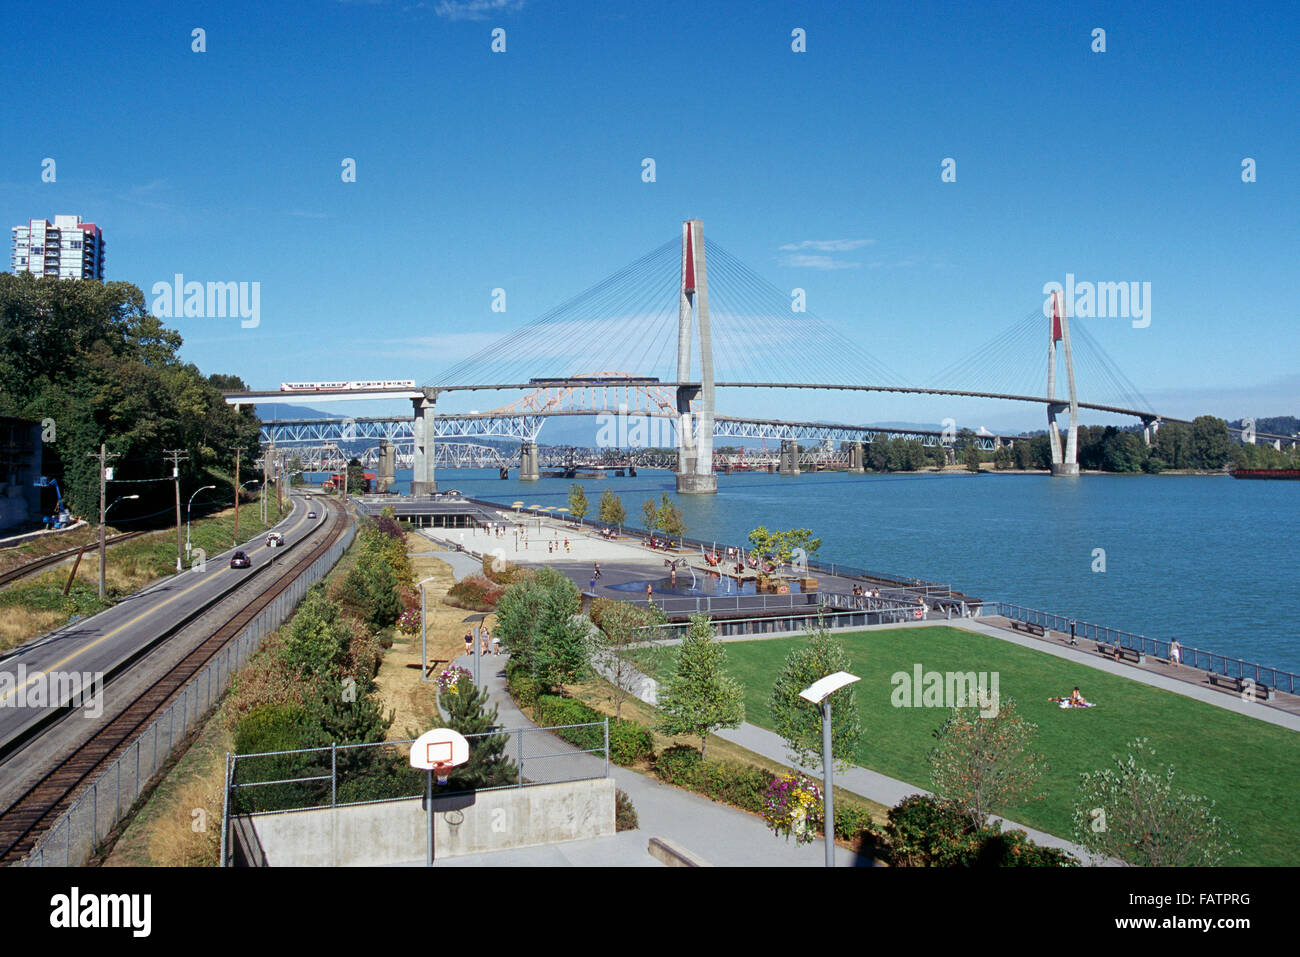 New Westminster Canada High Resolution Stock Photography and Images - Alamy